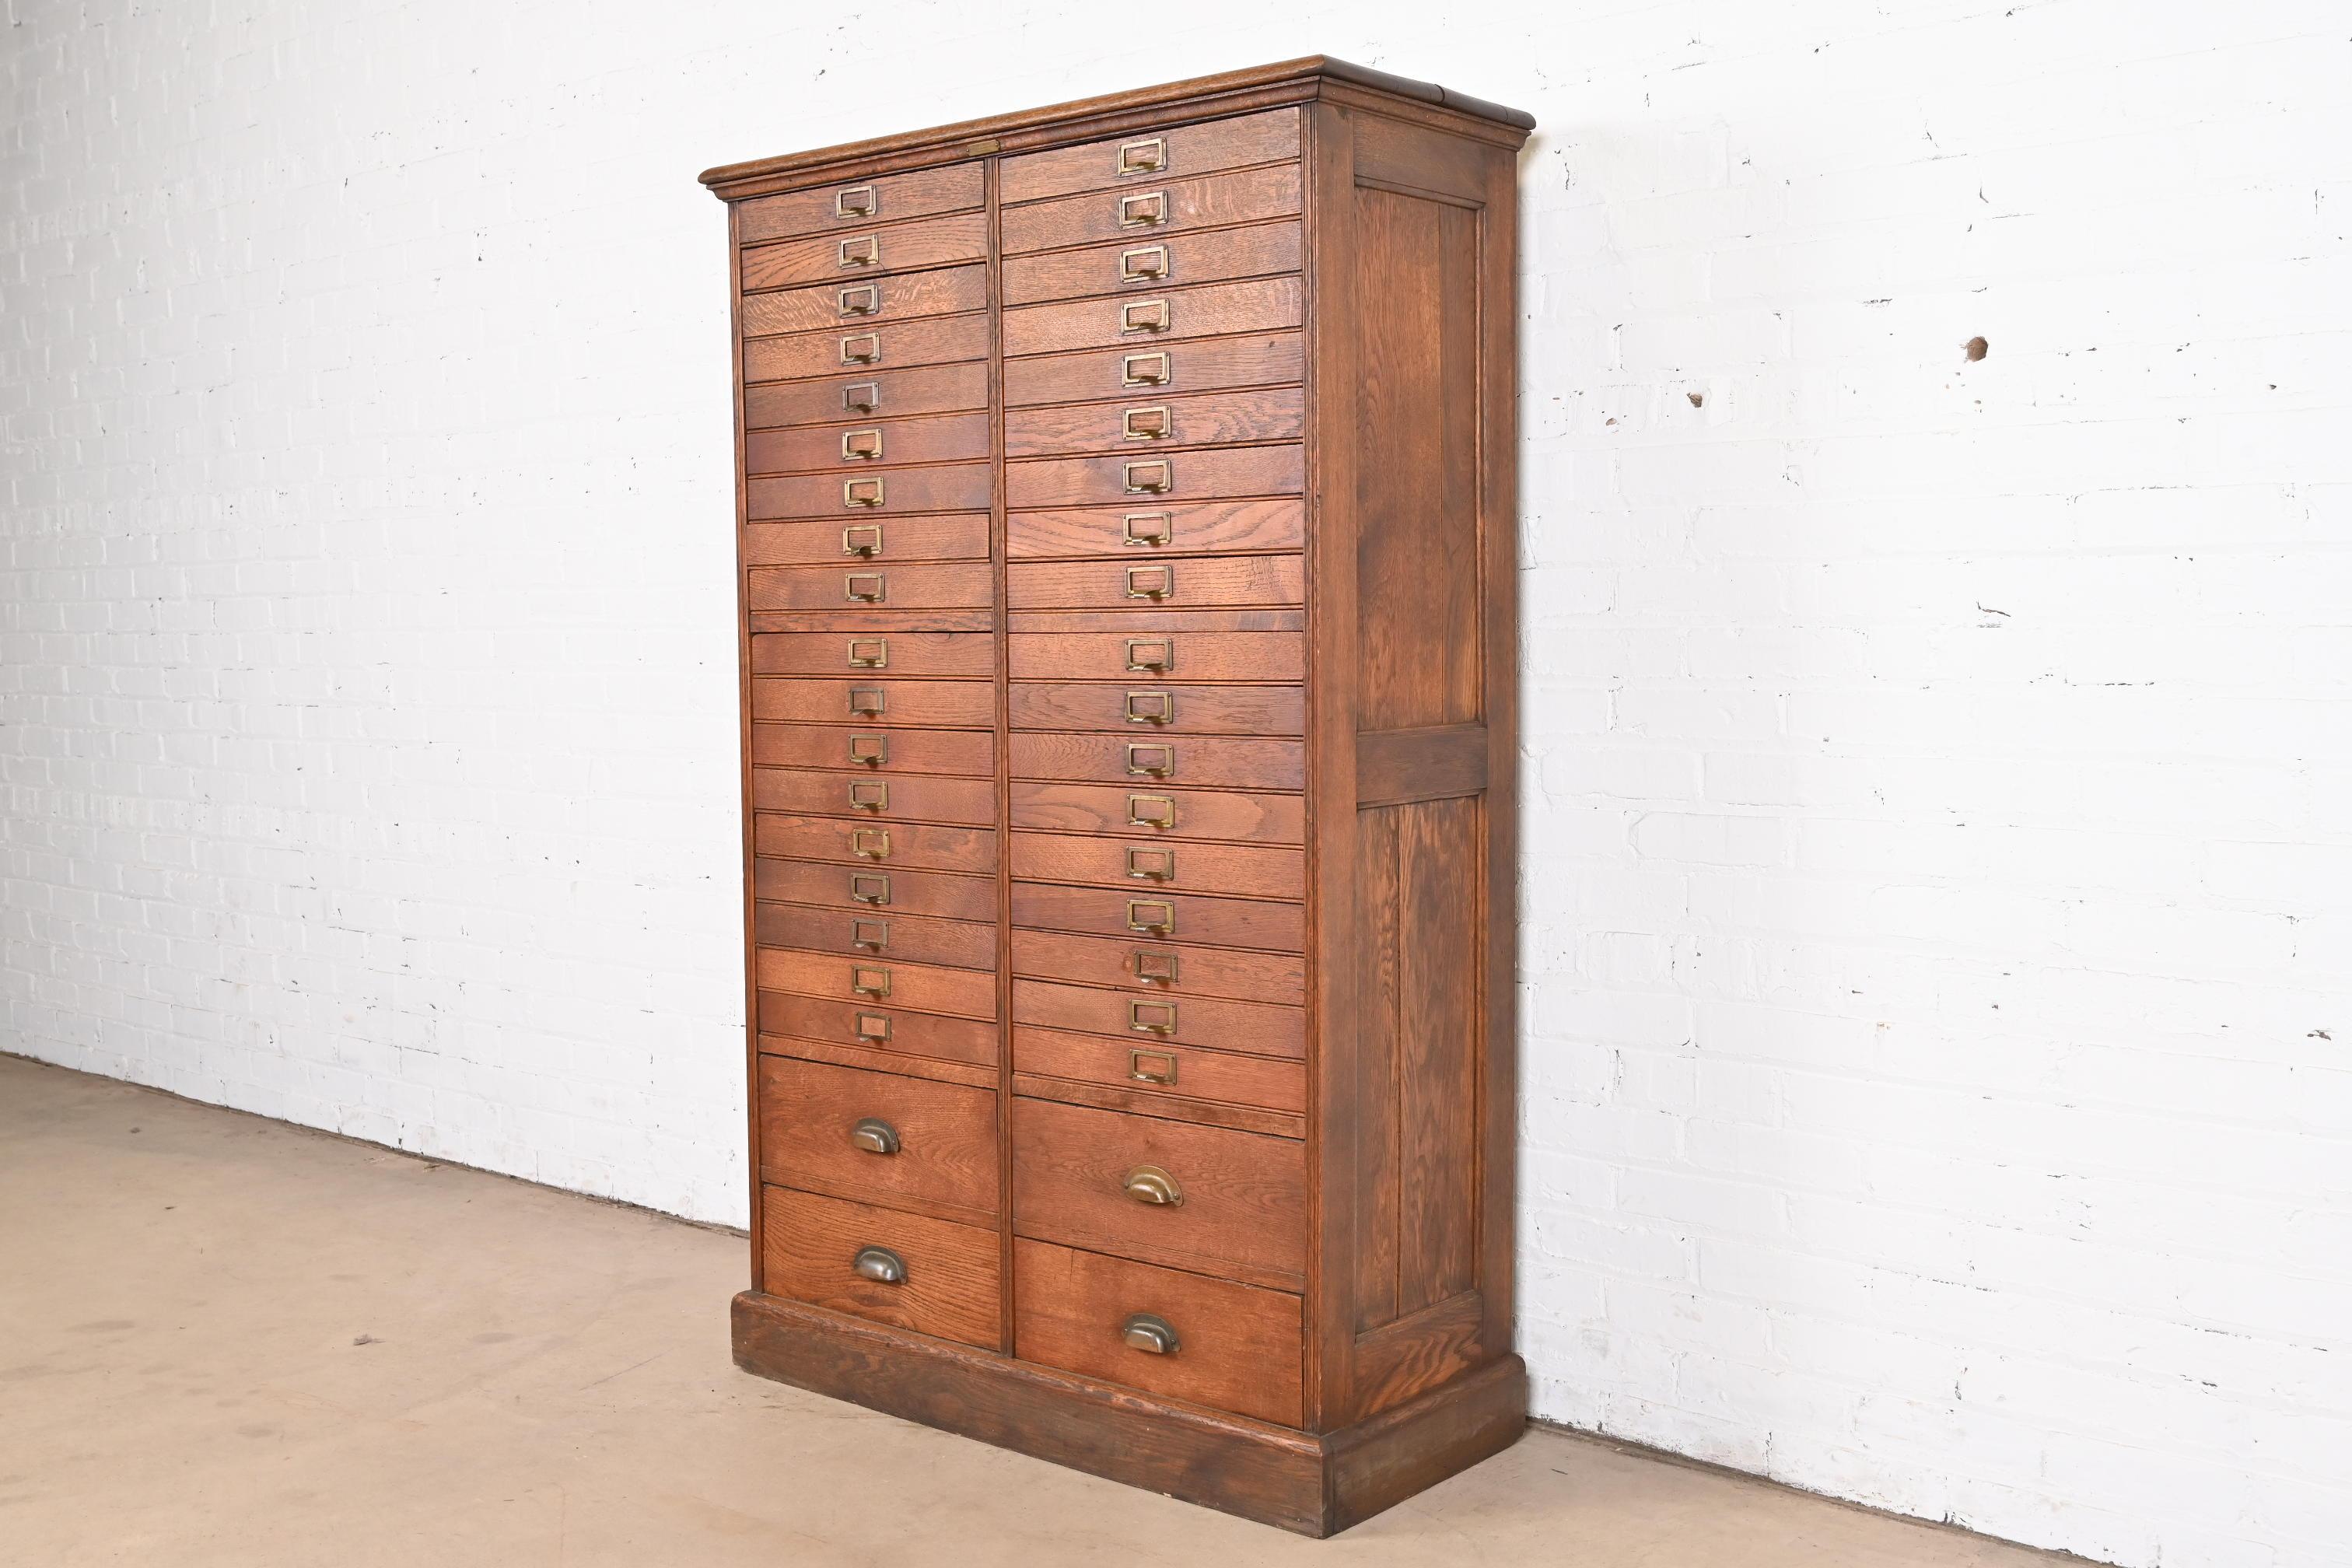 American Antique Arts & Crafts Oak 40-Drawer File Cabinet or Chest of Drawers, Circa 1900 For Sale